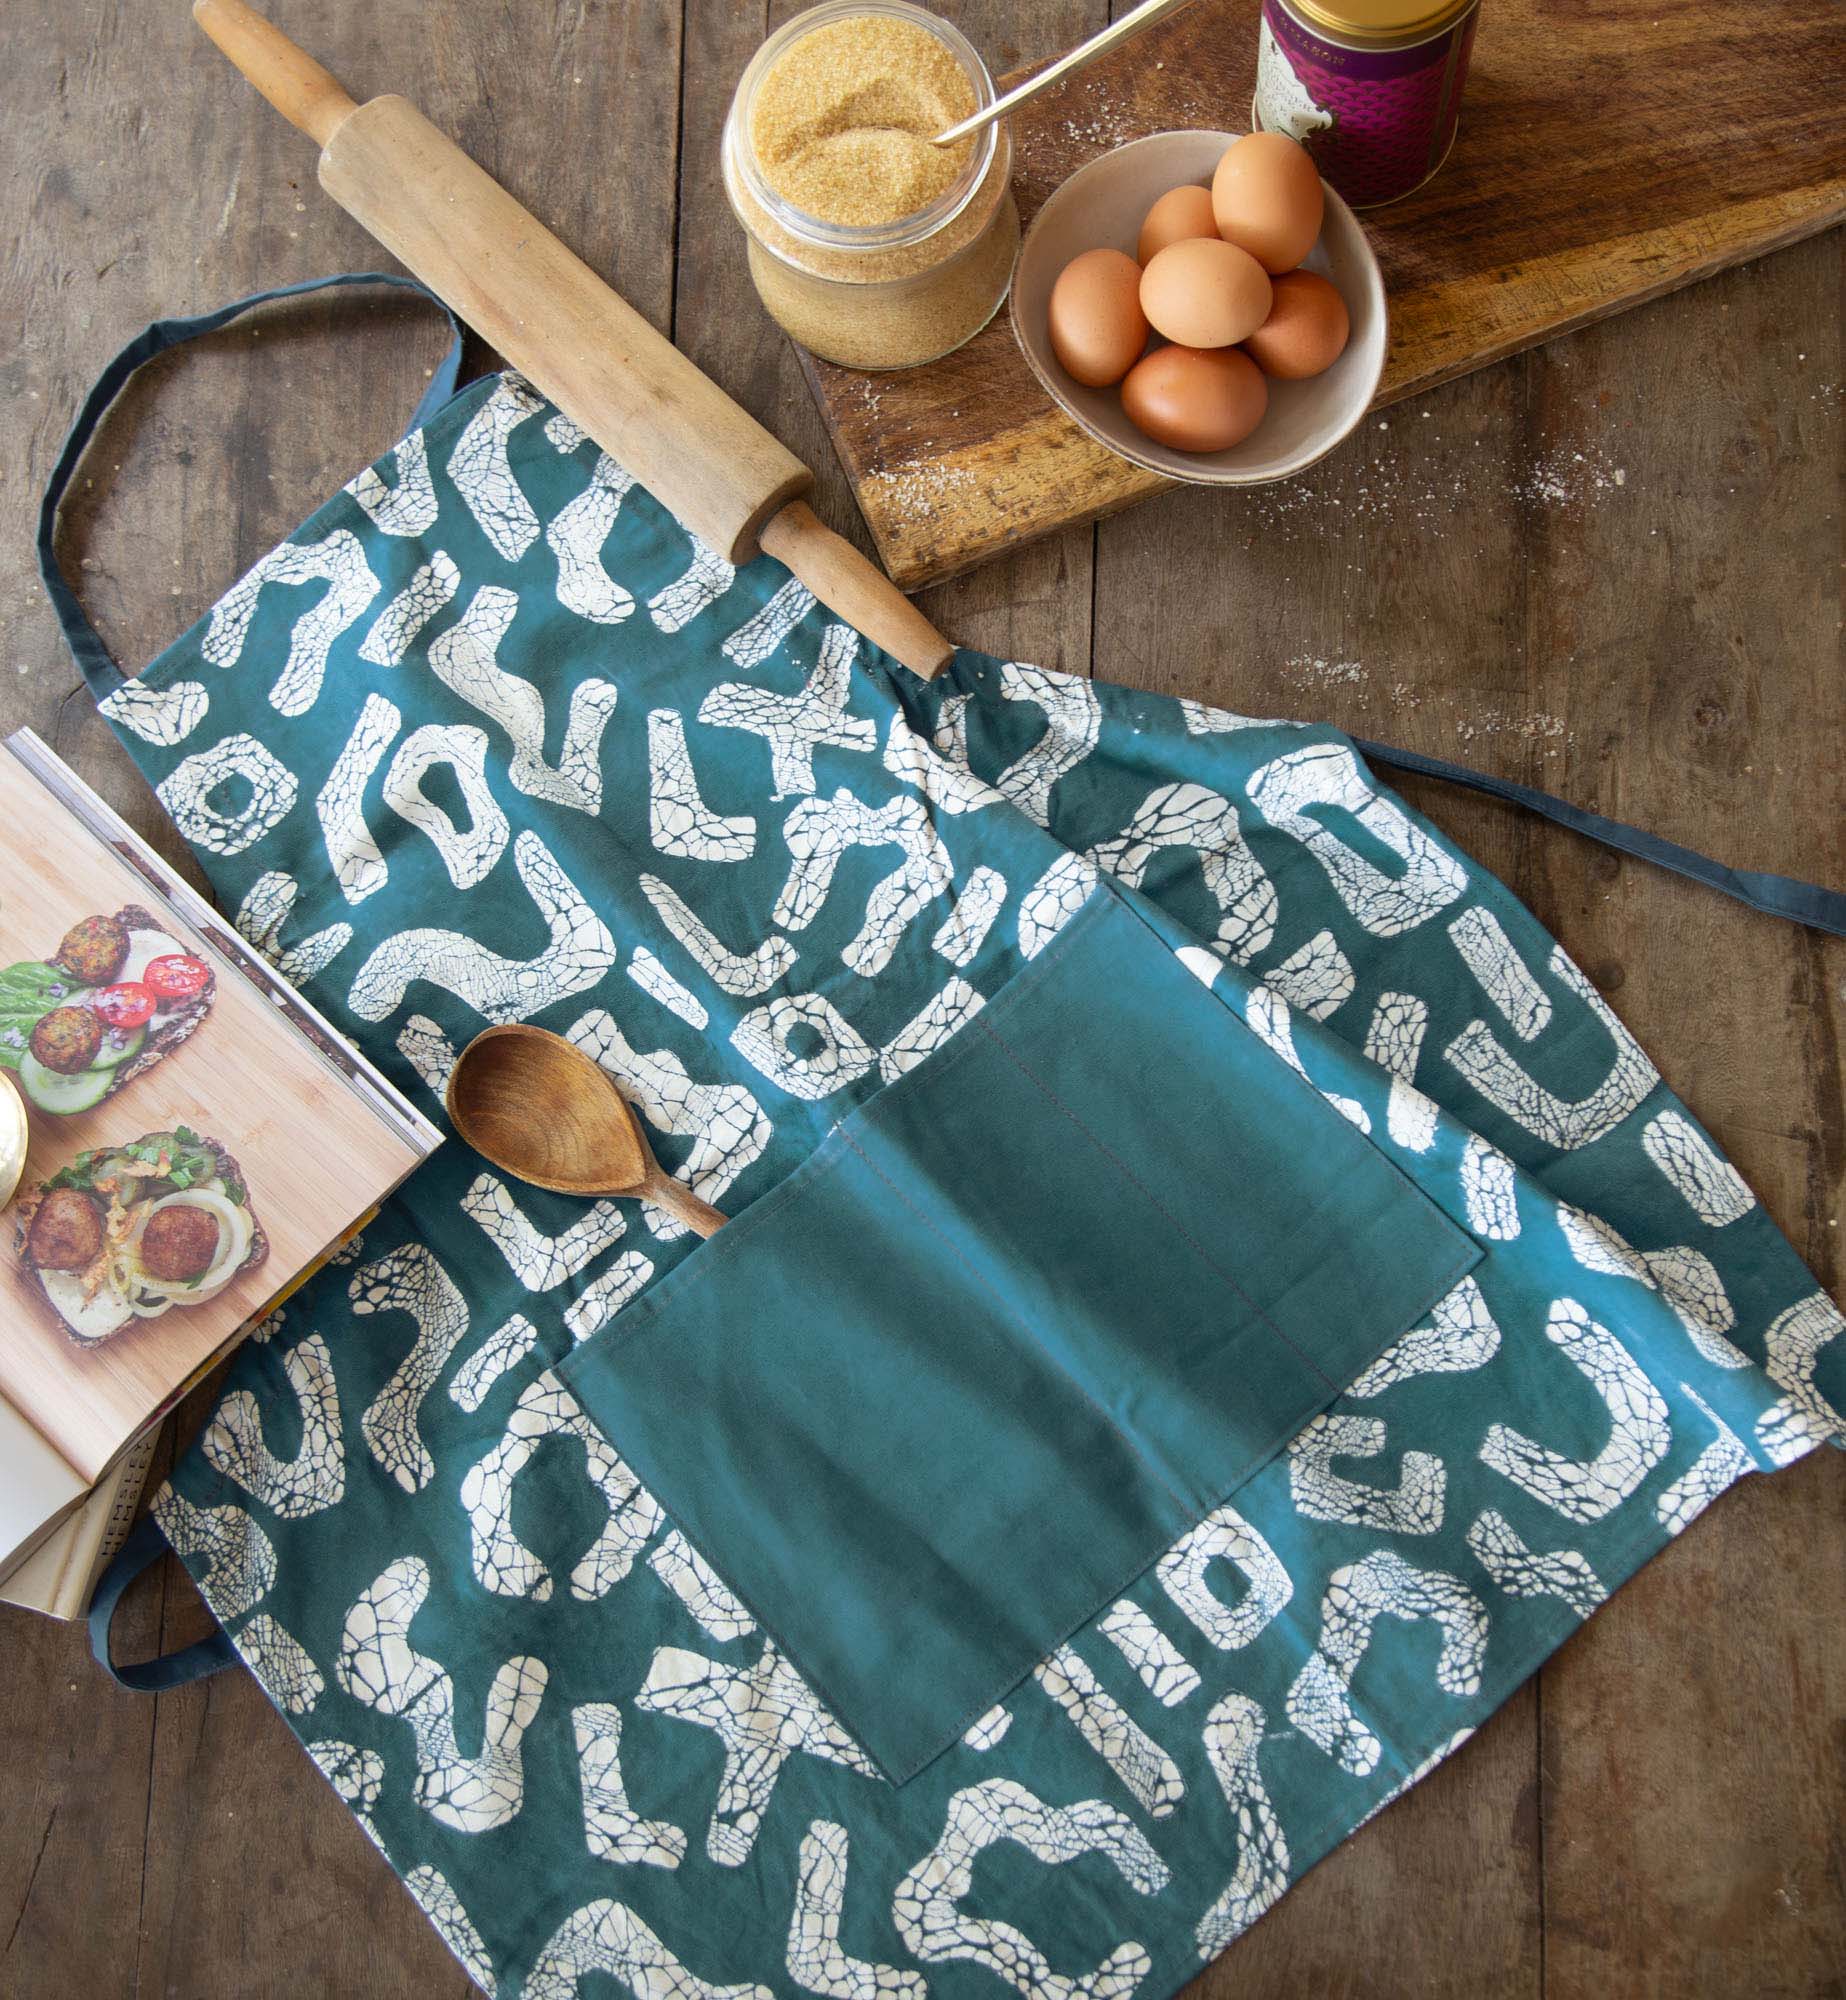 Kuba Blues Filled Teal Apron - Handmade by TRIBAL TEXTILES - Handcrafted Home Decor Interiors - African Made